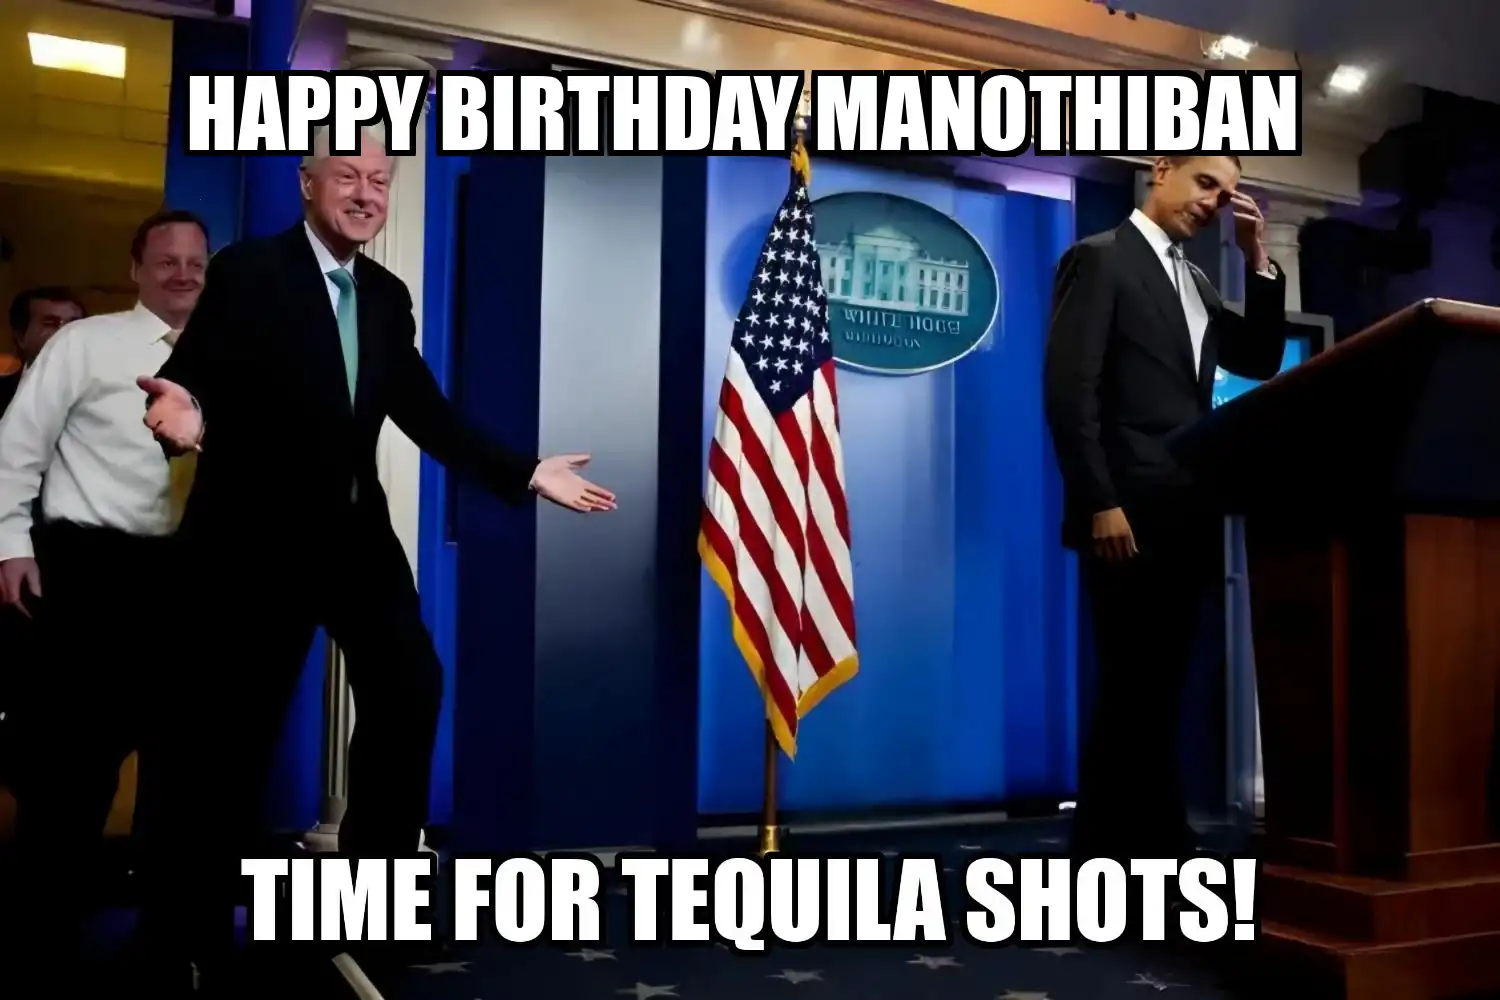 Happy Birthday Manothiban Time For Tequila Shots Memes